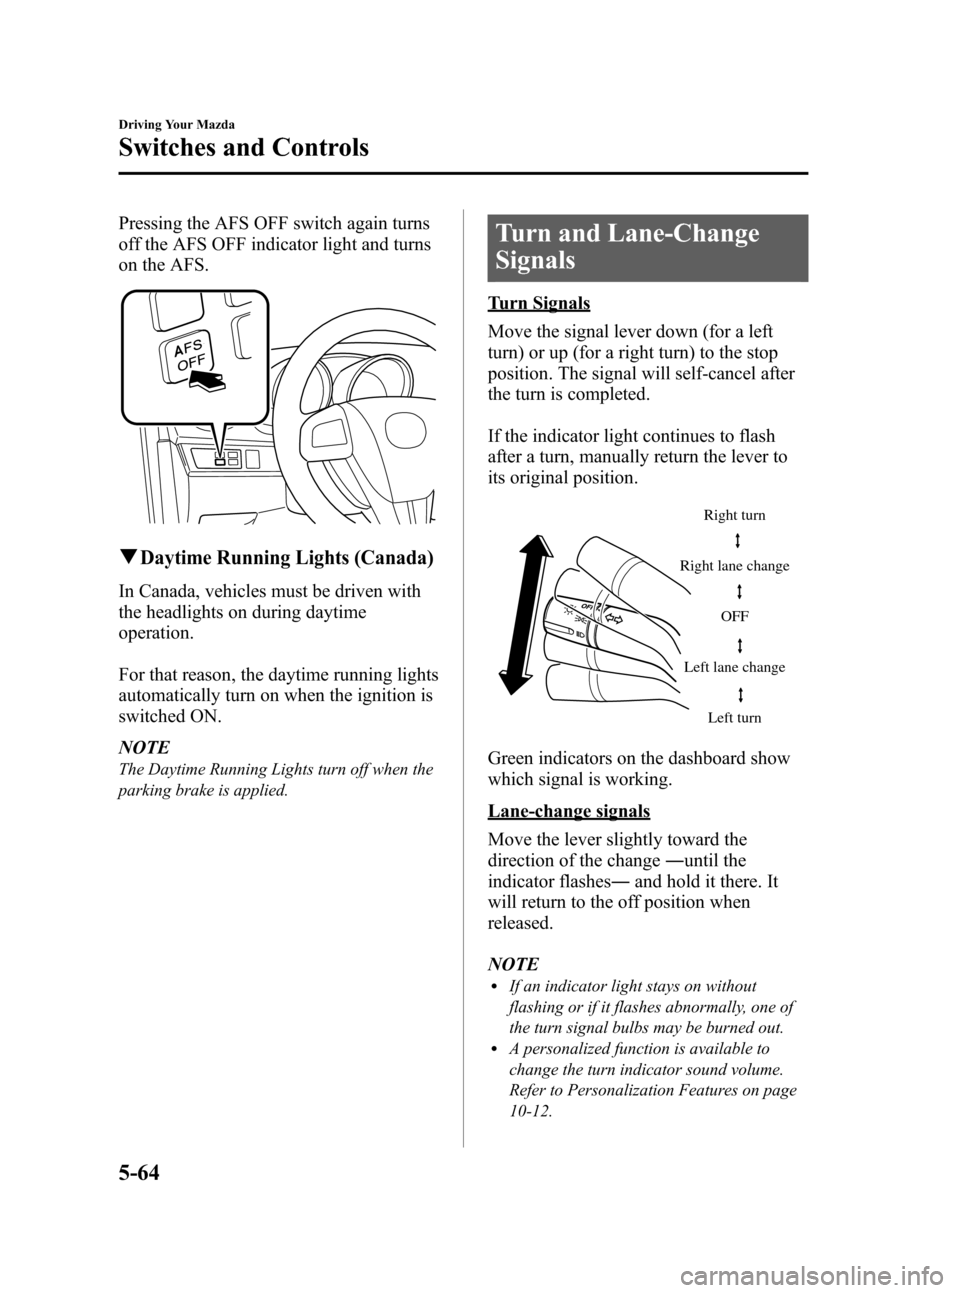 MAZDA MODEL 3 HATCHBACK 2011  Owners Manual (in English) Black plate (224,1)
Pressing the AFS OFF switch again turns
off the AFS OFF indicator light and turns
on the AFS.
qDaytime Running Lights (Canada)
In Canada, vehicles must be driven with
the headlight